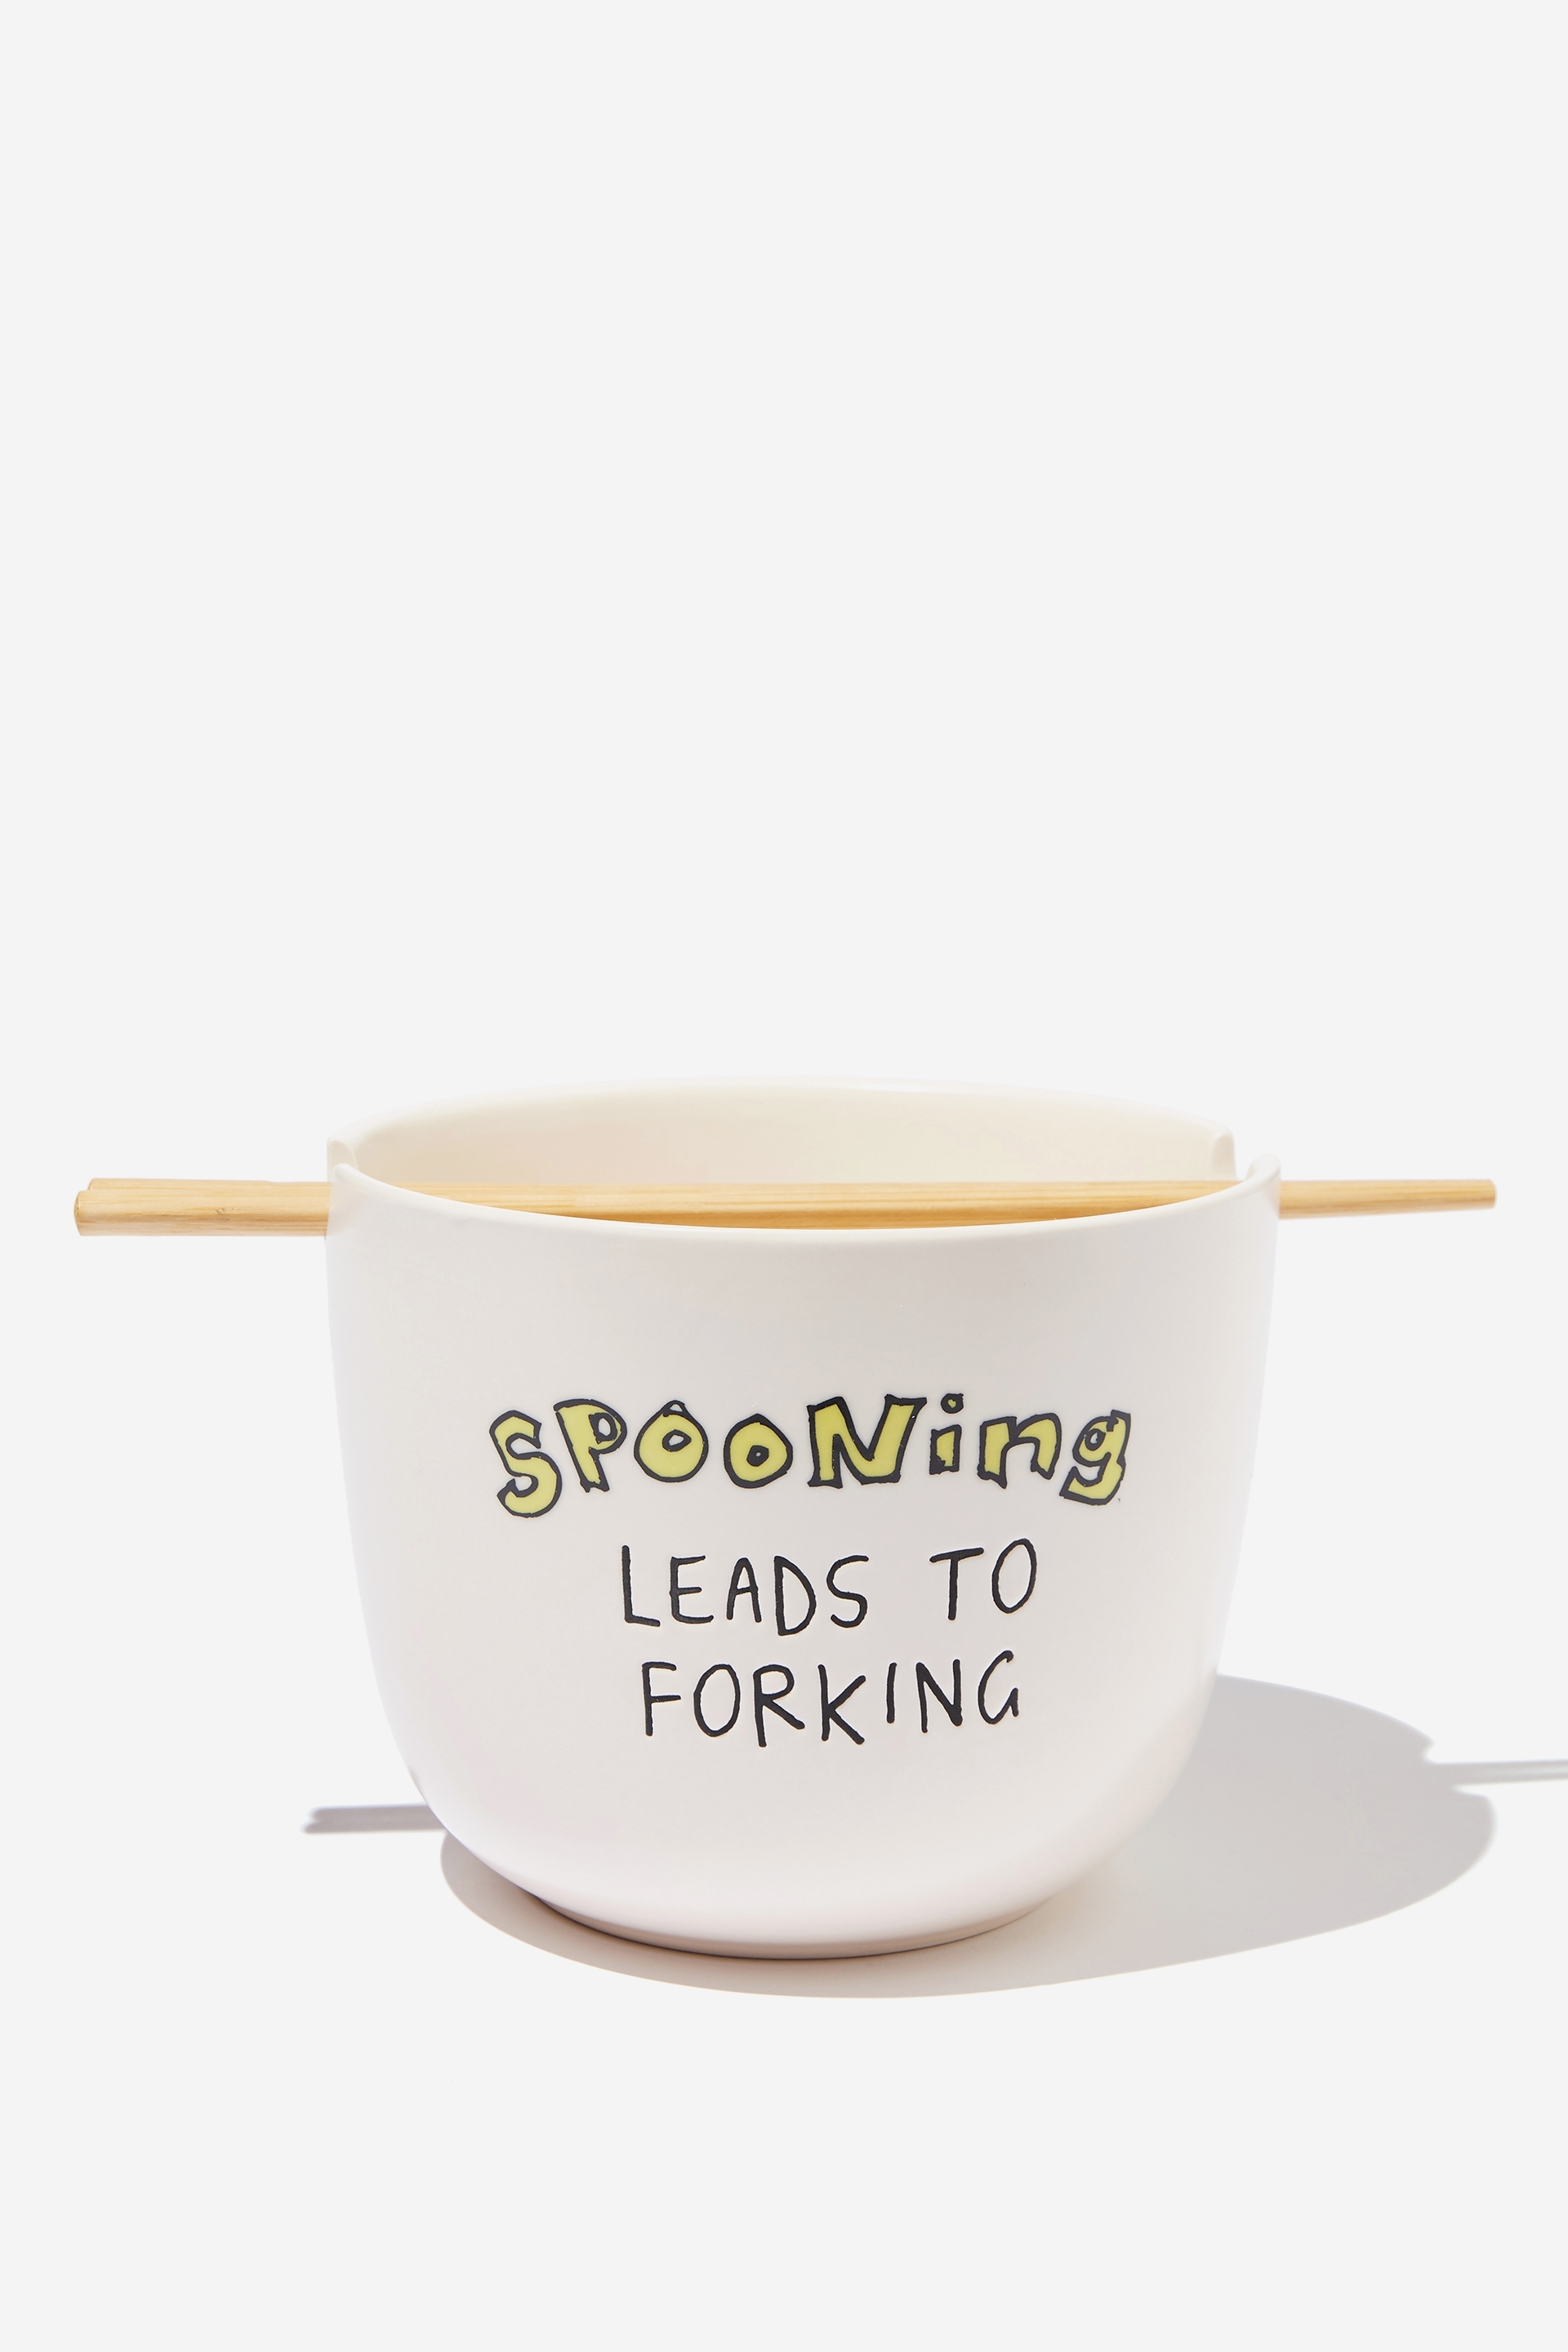 Typo - Feed Me Bowl - Spooning leads to forking